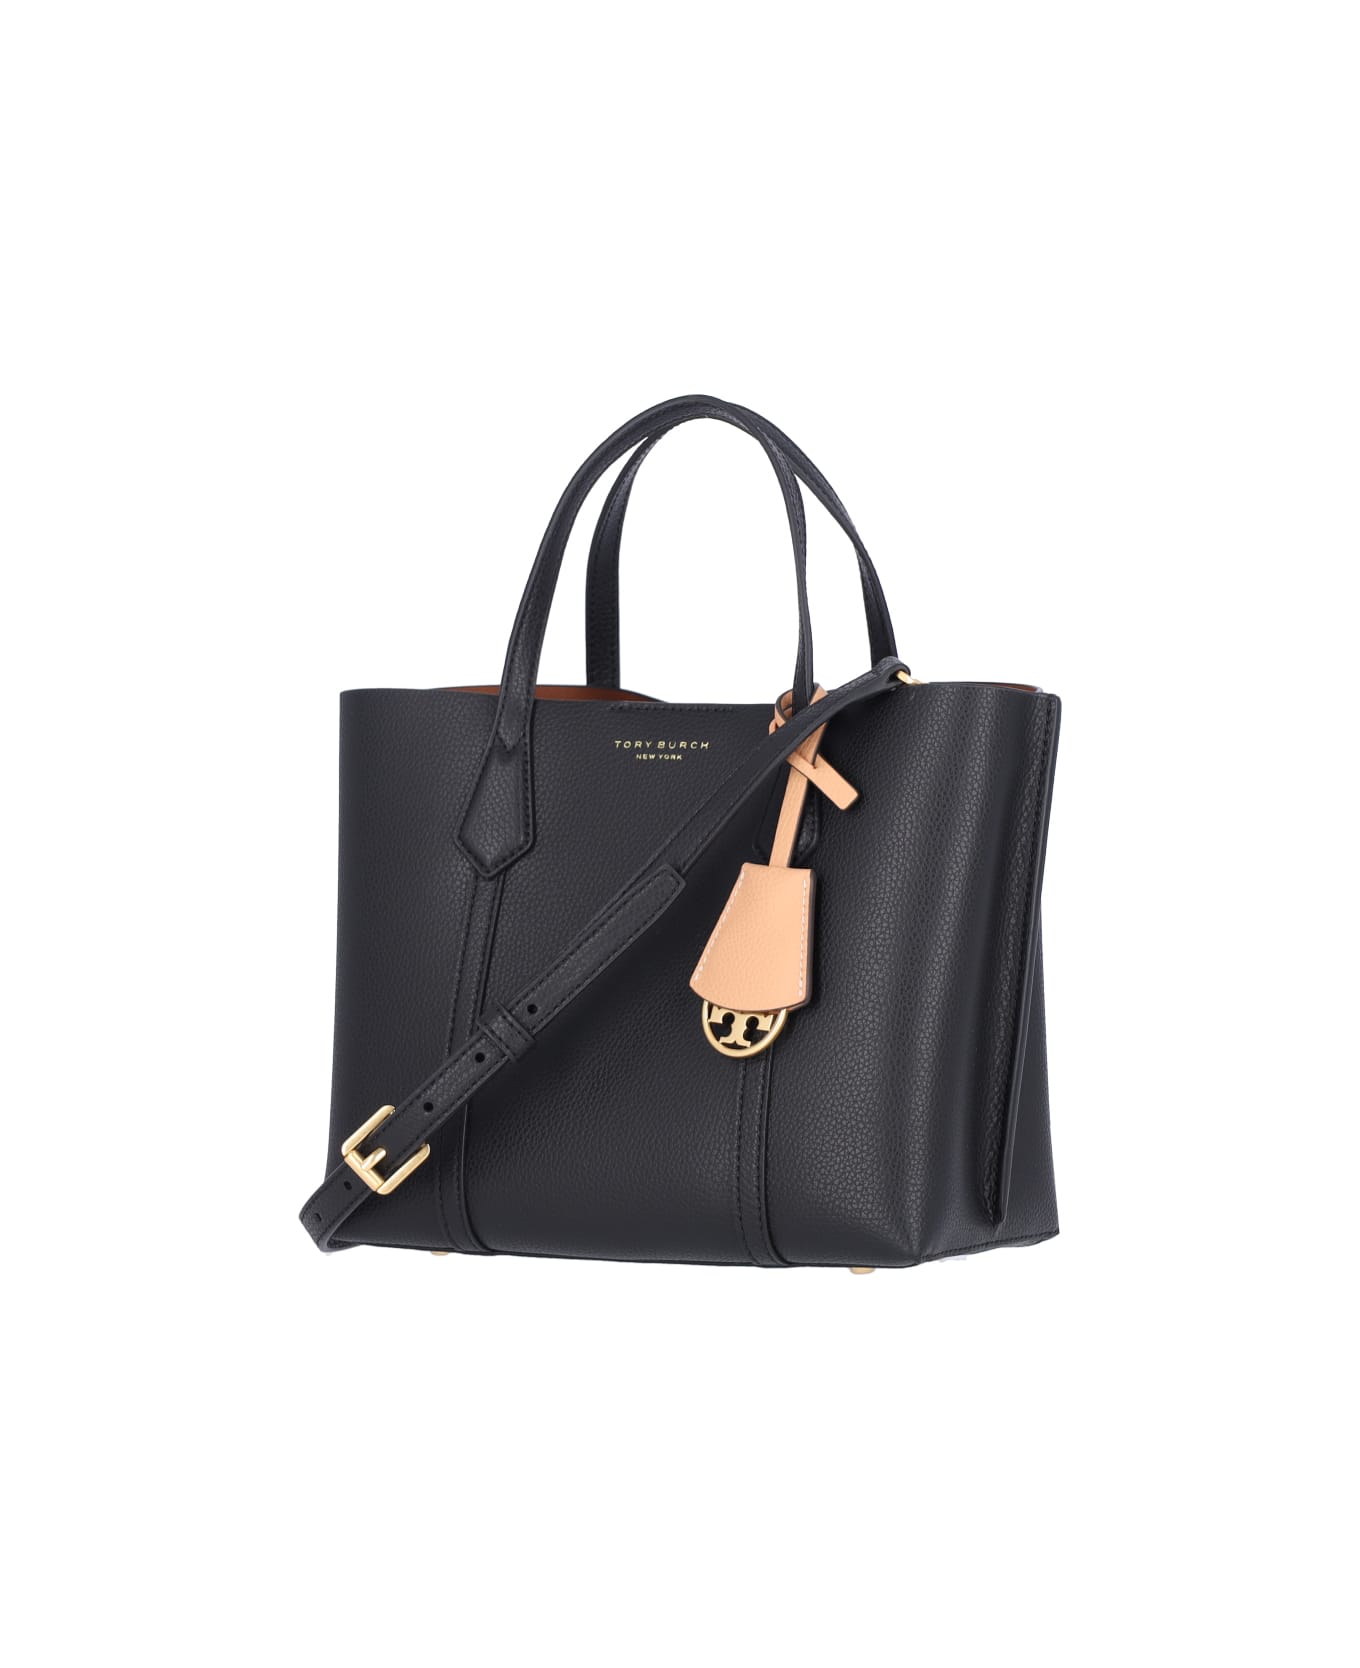 Tory Burch 'perry' Small Tote Bag - Black  